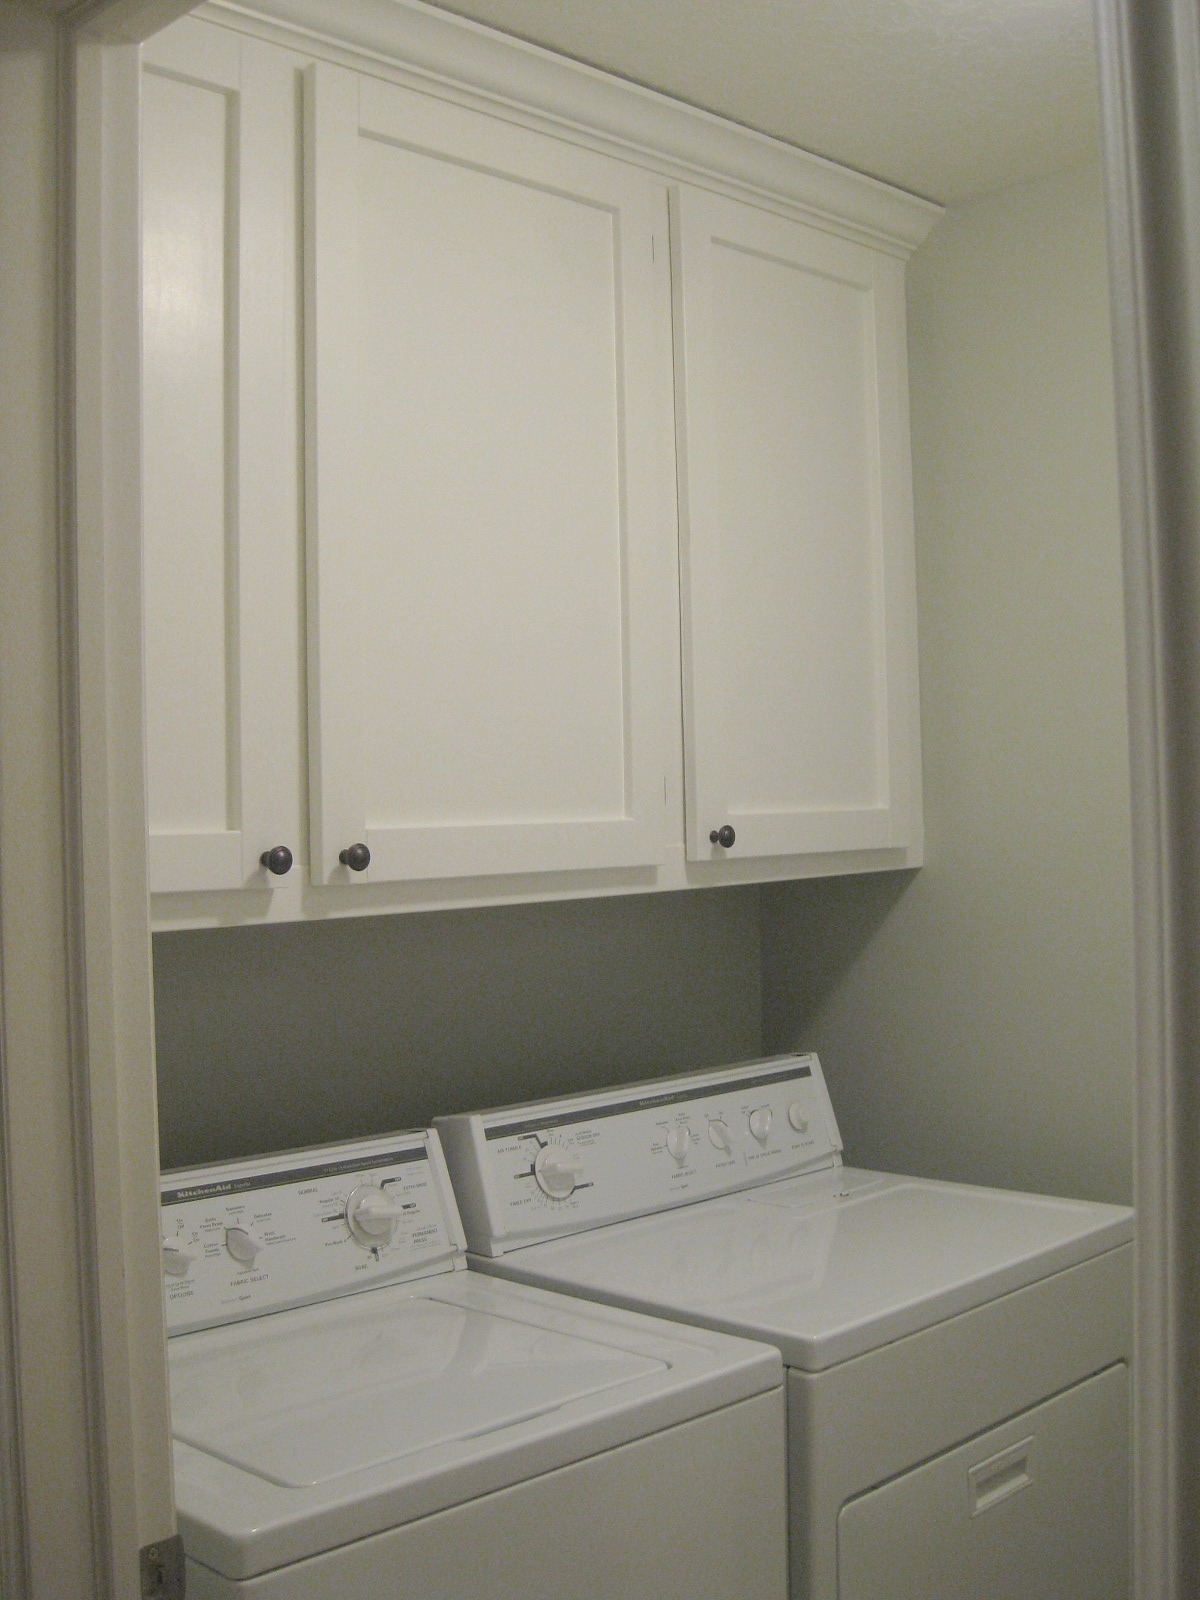 TDA decorating and design: Laundry Room Cabinet Tutorial ...